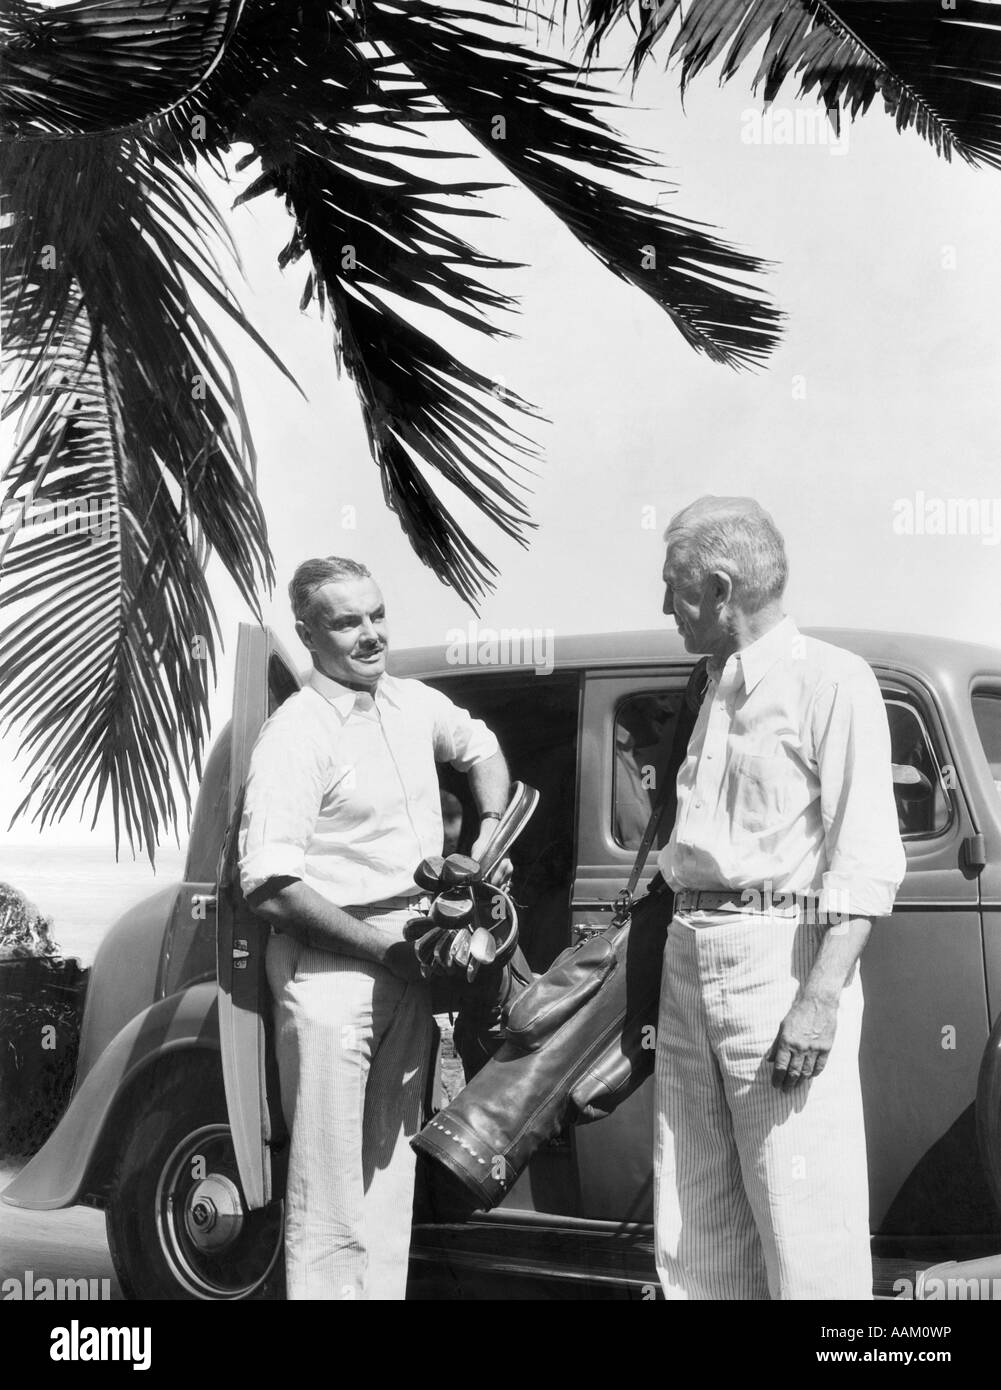 1930s 2 ELDERLY MEN STANDING BY CAR CARRYING GOLF BAG PALM TREE FROND IN CORNER Stock Photo